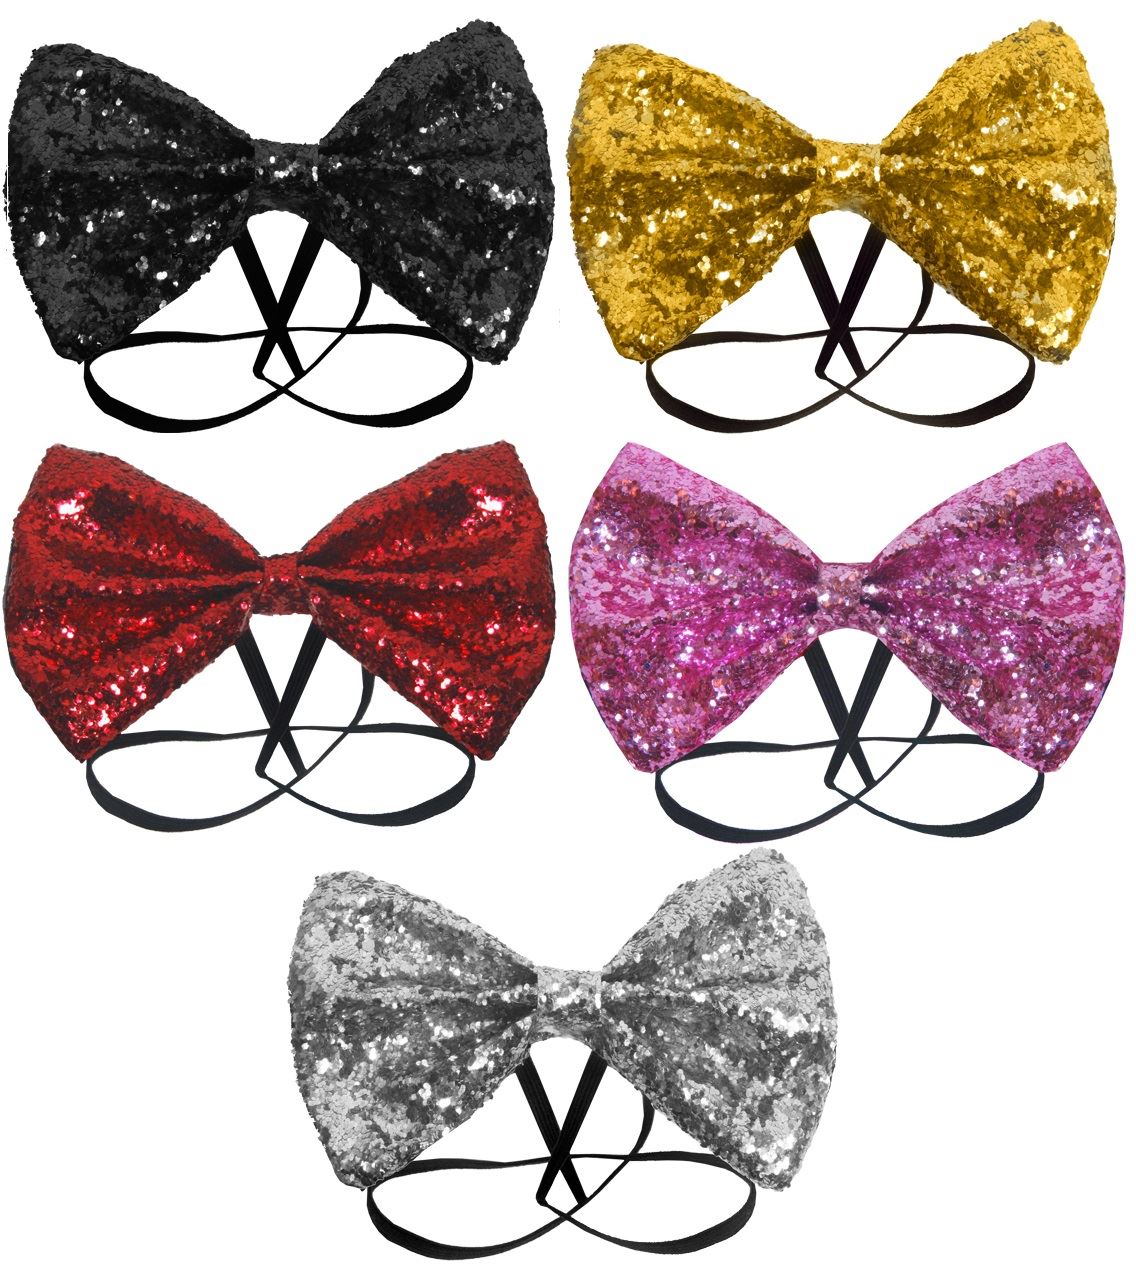 GLITTER SPARKLY SEQUIN DICKY DICKIE BOW TIE FANCY DRESS COSTUME ...